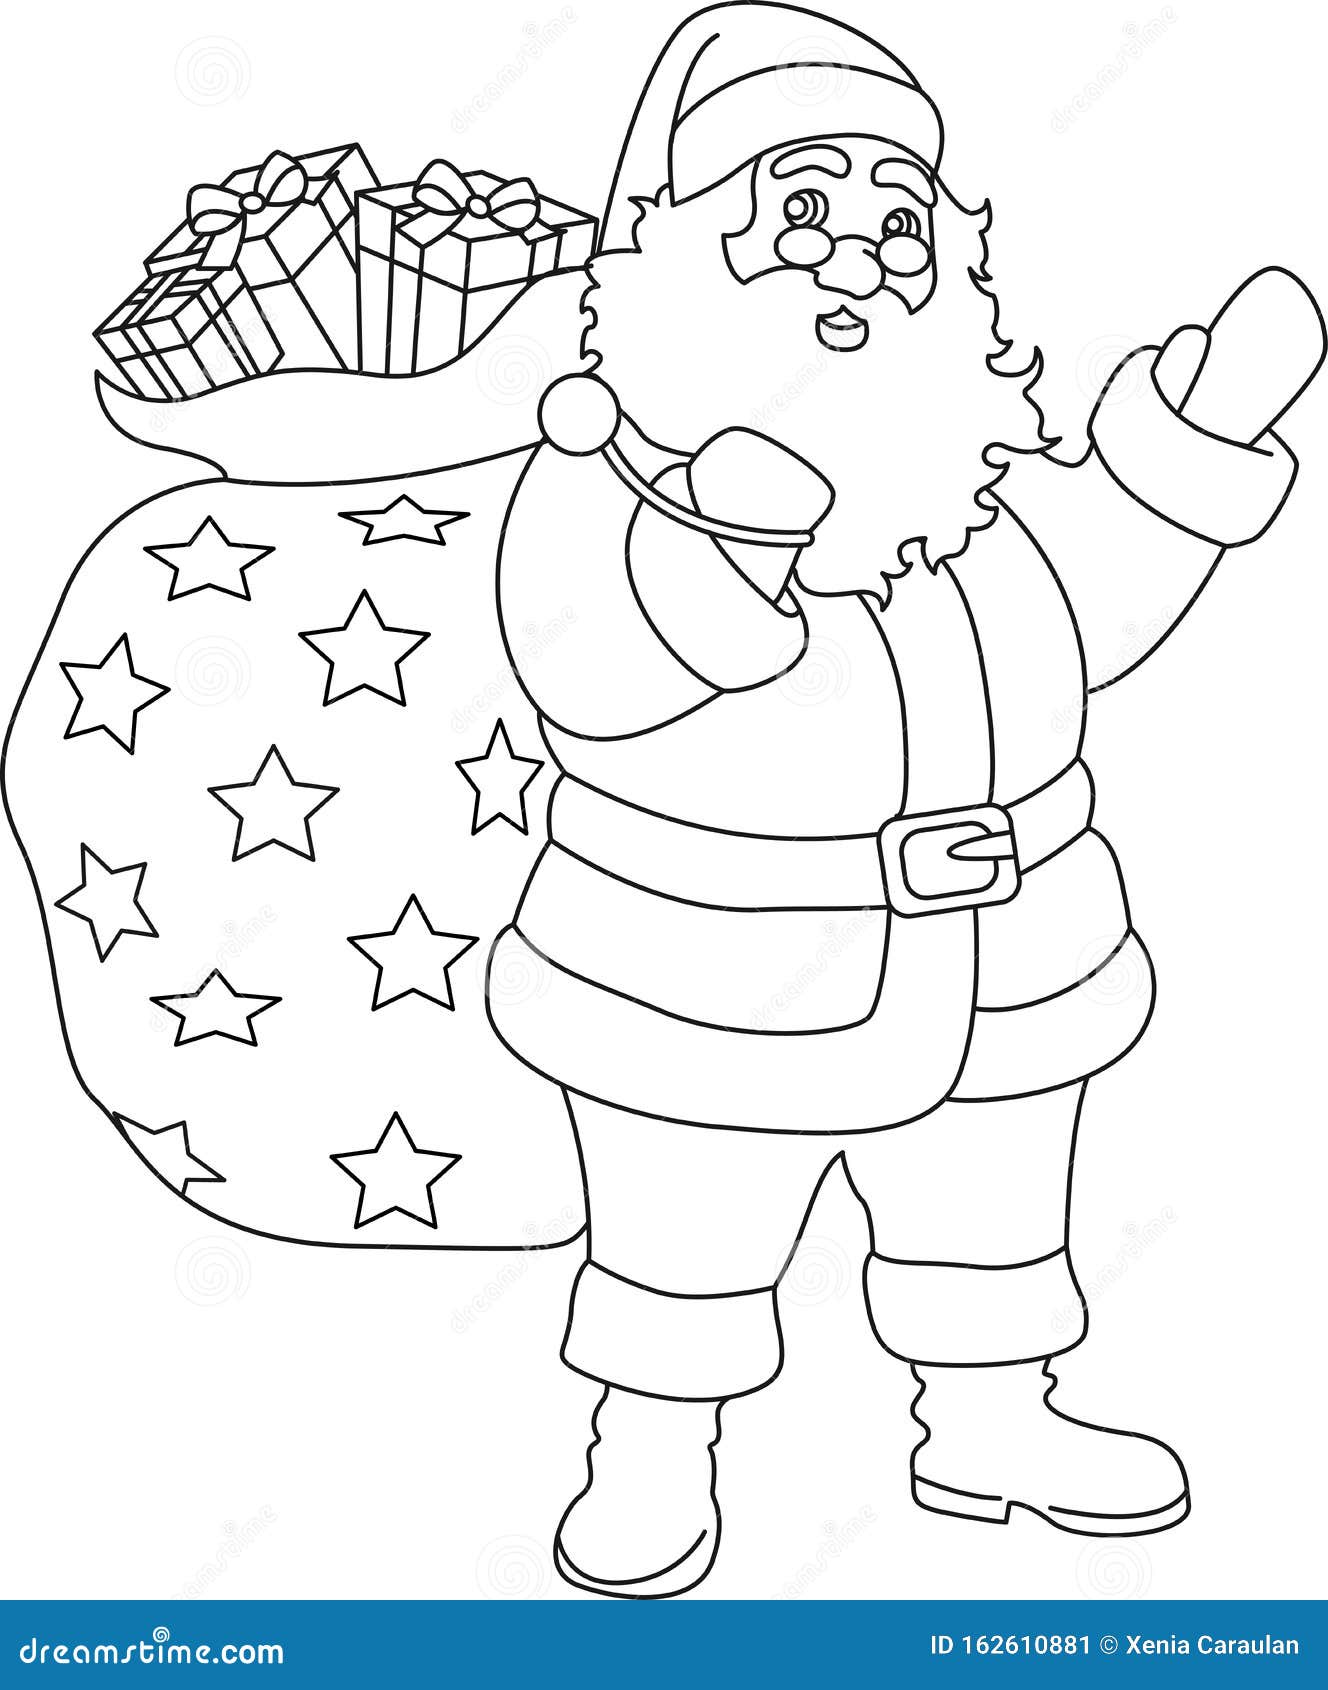 Coloring Book. Coloring Pages Christmas Illustration in Outlines ...